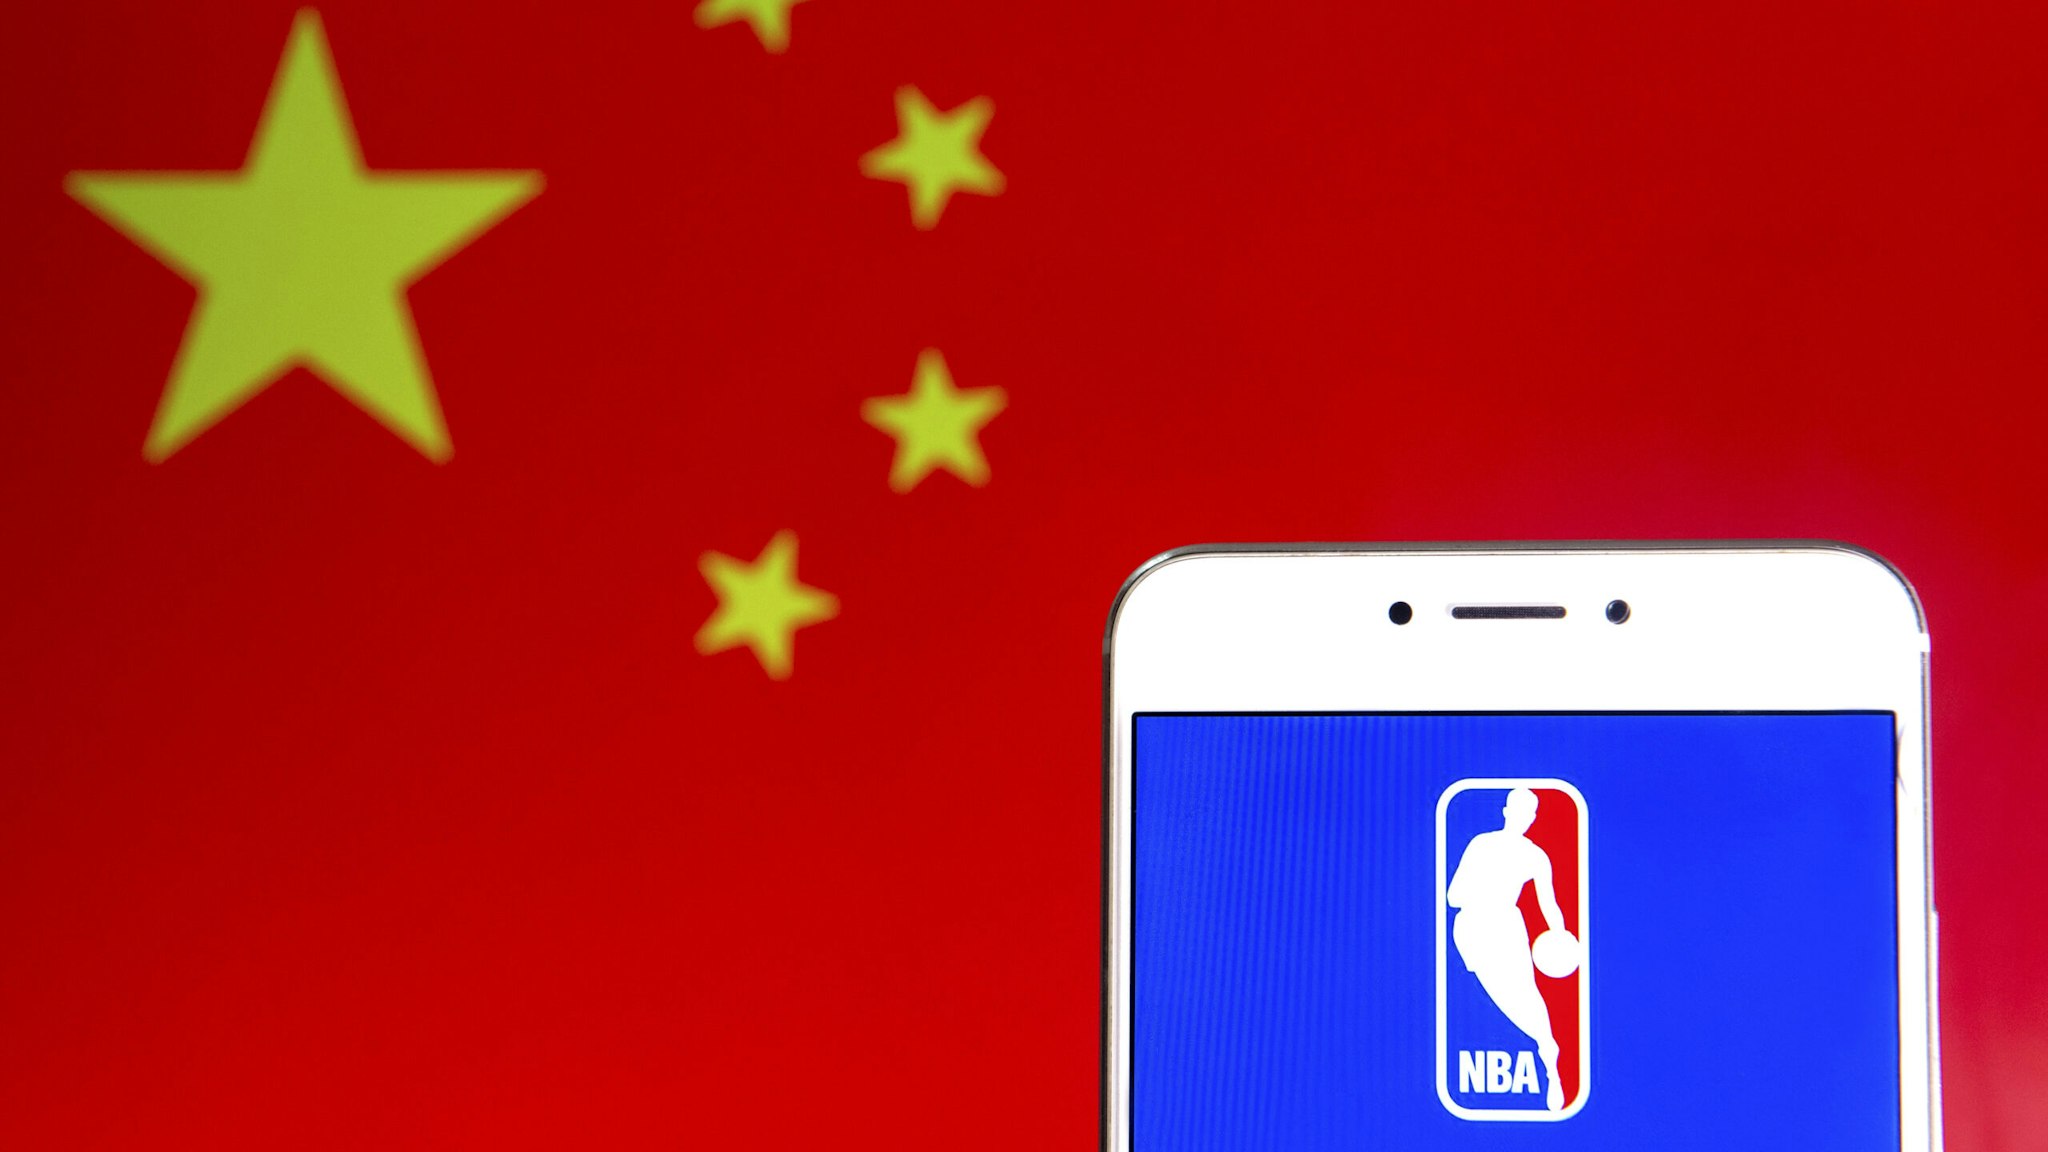 HONG KONG - 2019/04/06: In this photo illustration a American National Basketball Association (NBA) men's professional basketball league logo is seen on an Android mobile device with People's Republic of China flag in the background.